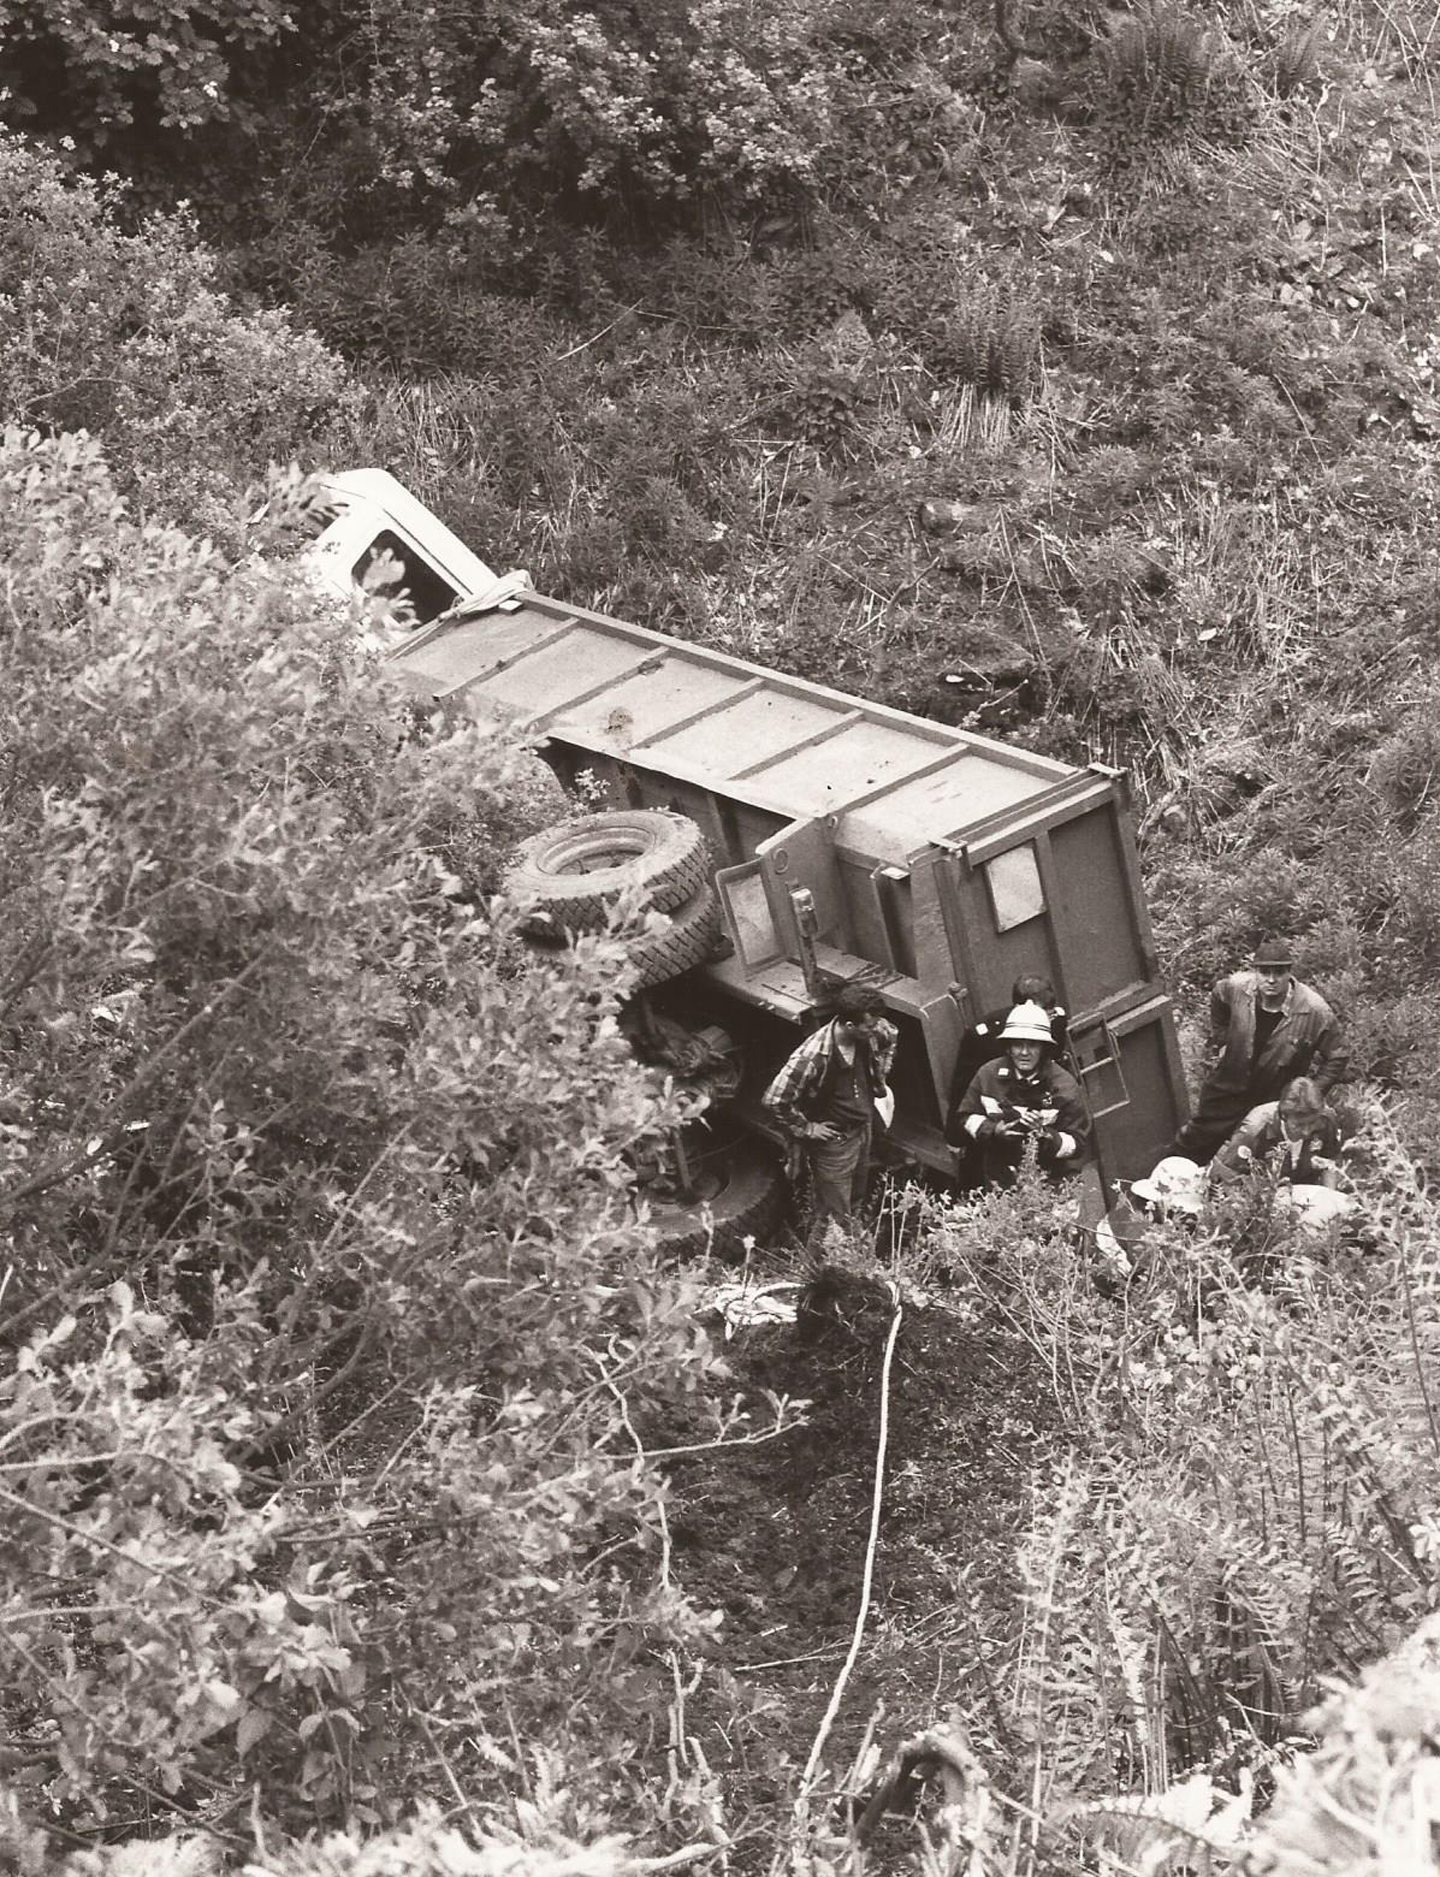 The lorry on its side at the foot of the embankment.